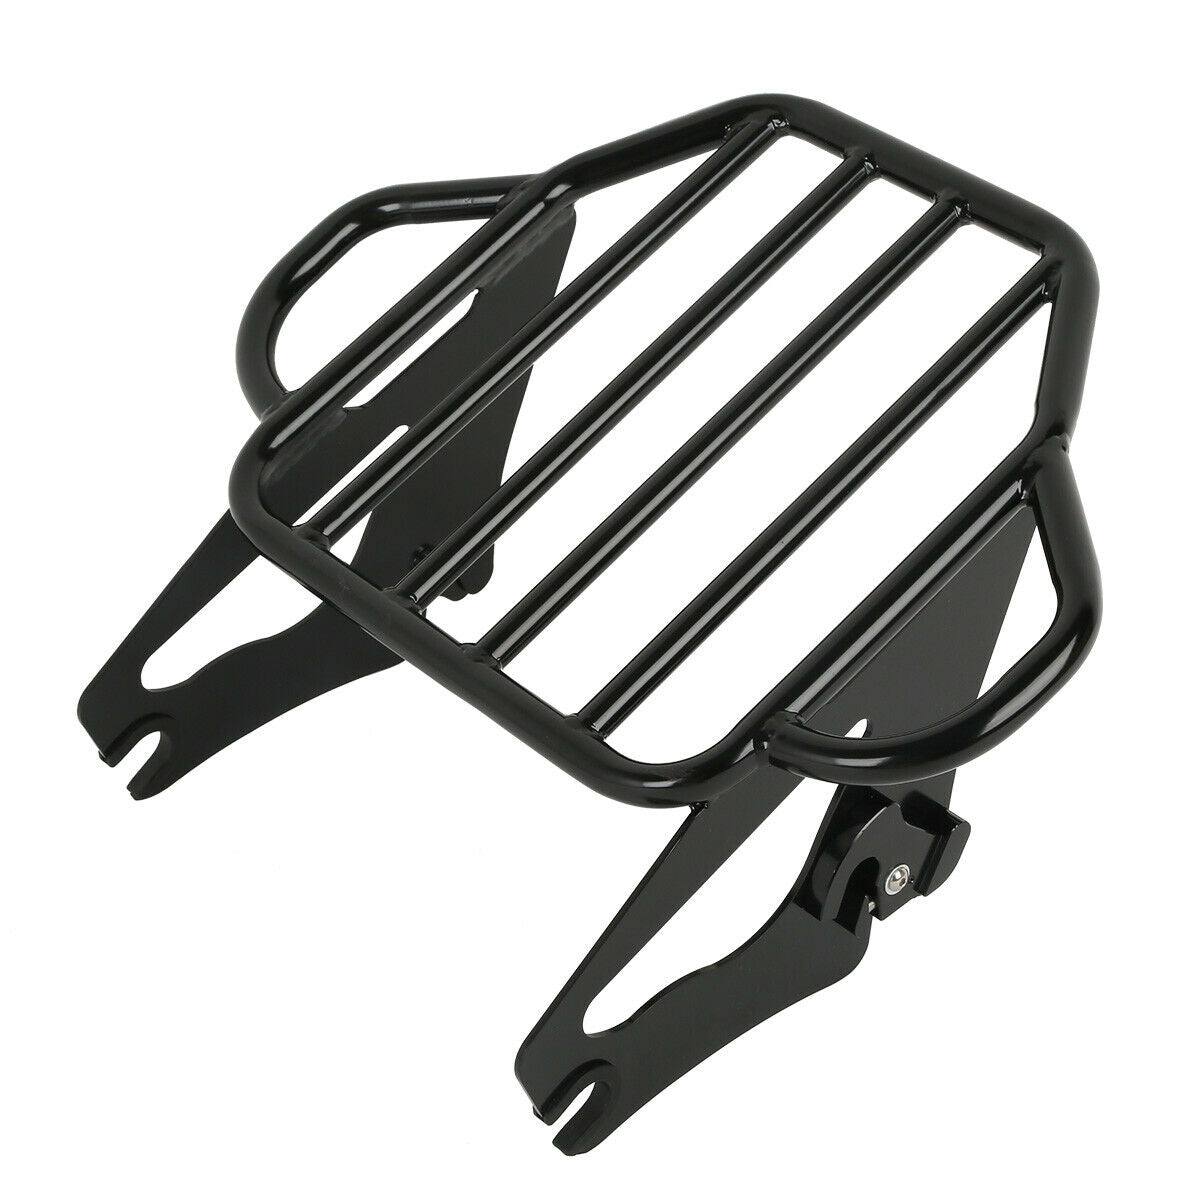 Two Up Detachable Luggage Rack Fit For Harley Road Electra Glide FLTRX 2009-2022 - Moto Life Products